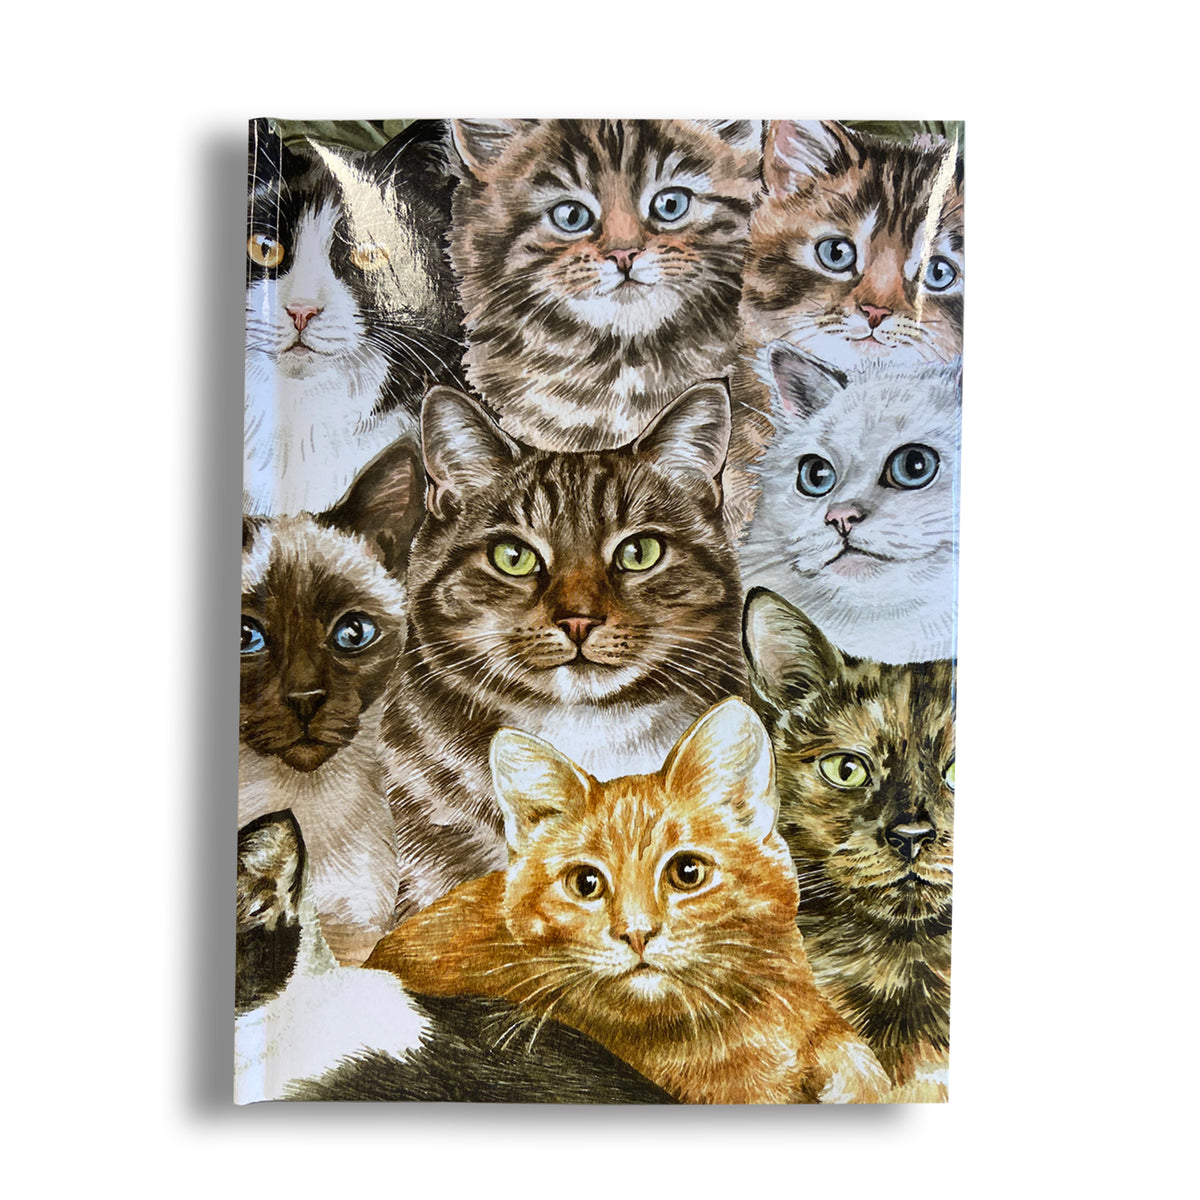 Cats Montage Notebook A5 Cover